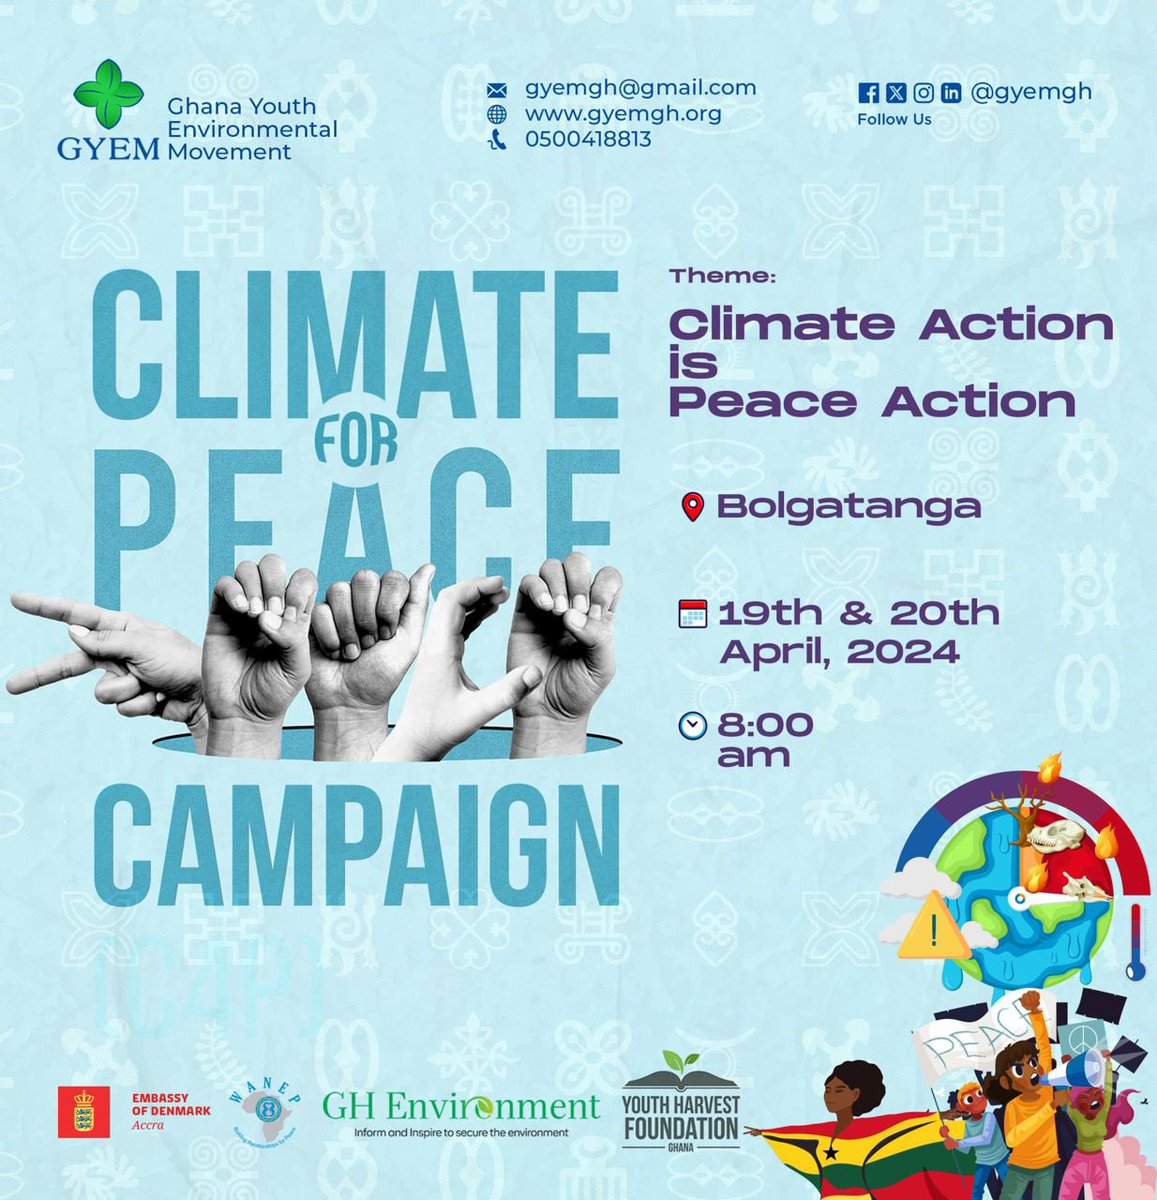 Support the #Climate4Peace campaign - raising awareness of the link between climate action (SDG 13) and peacebuilding (SDG 16).